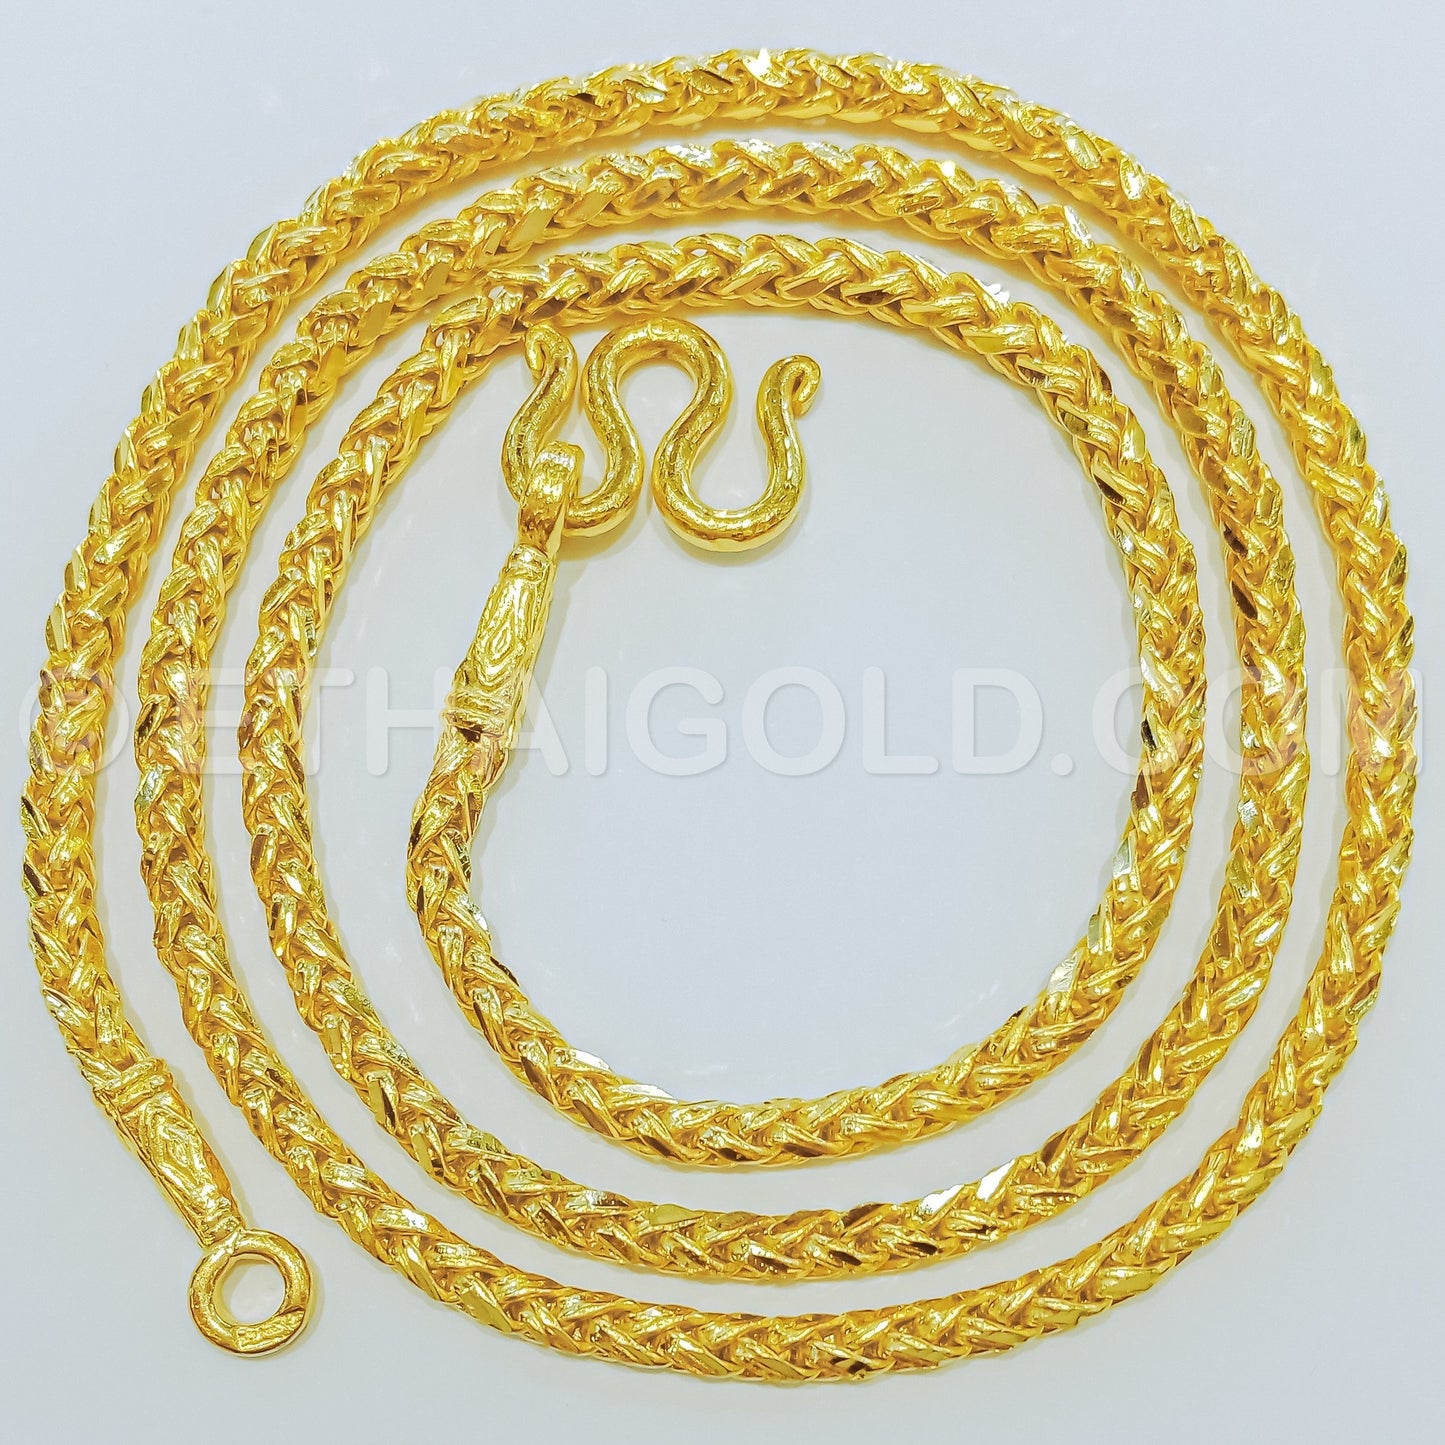 4 BAHT POLISHED DIAMOND-CUT SOLID PALMA CHAIN NECKLACE IN 23K GOLD (ID: N1504B)